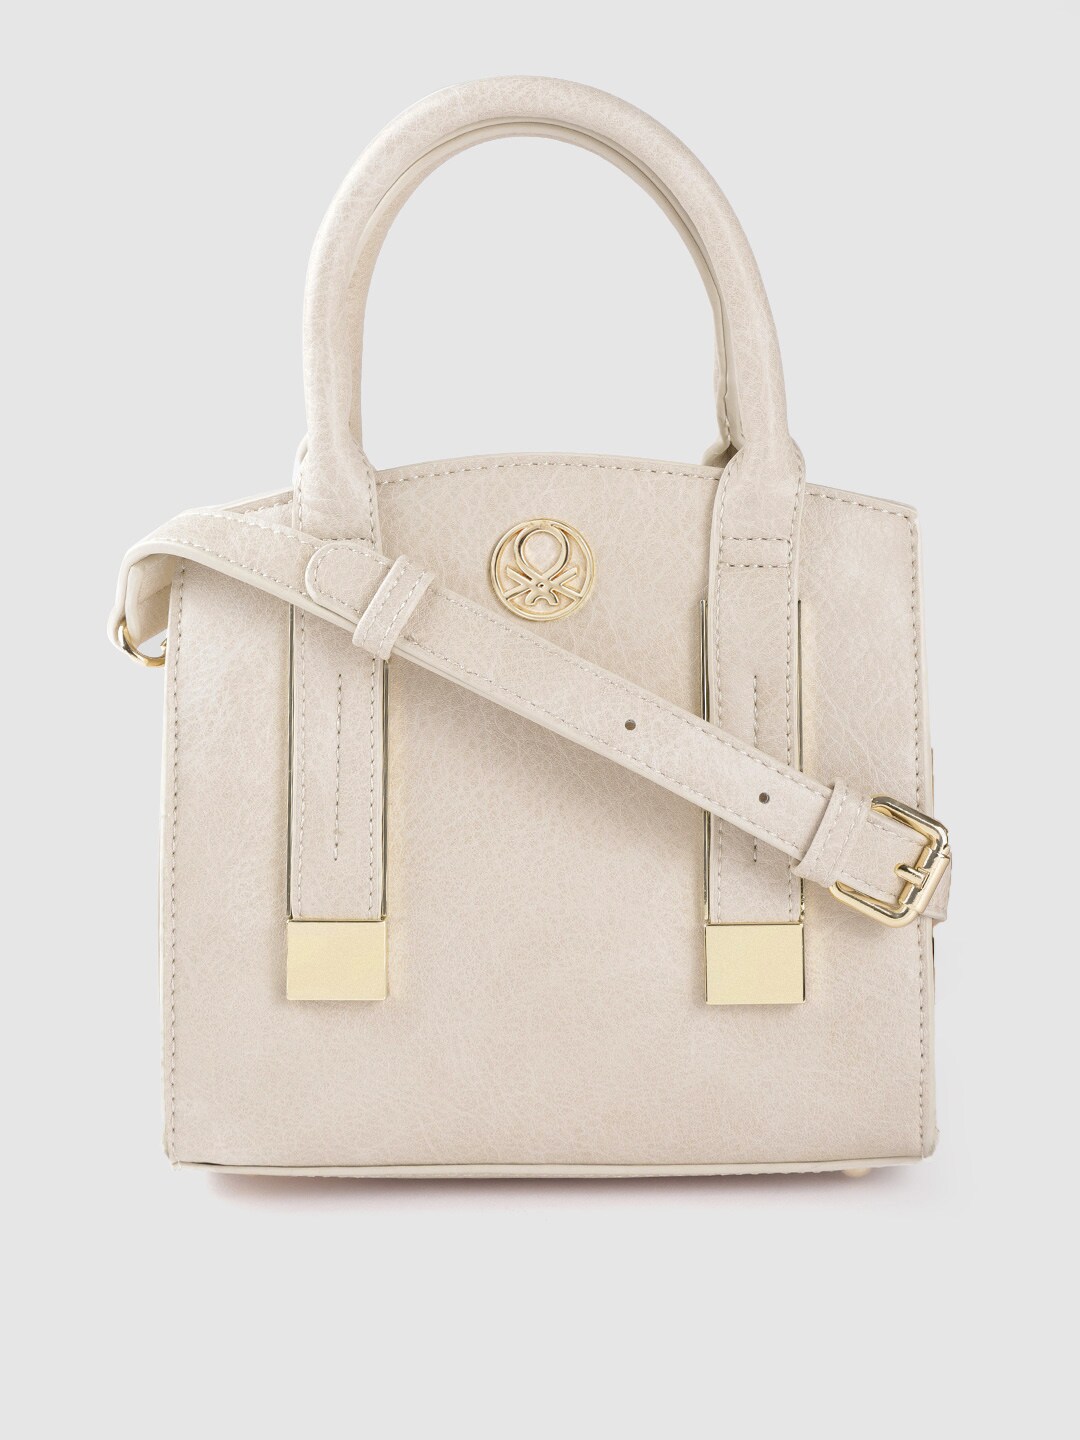 United Colors of Benetton Cream-Coloured Textured Structured Handheld Bag Price in India